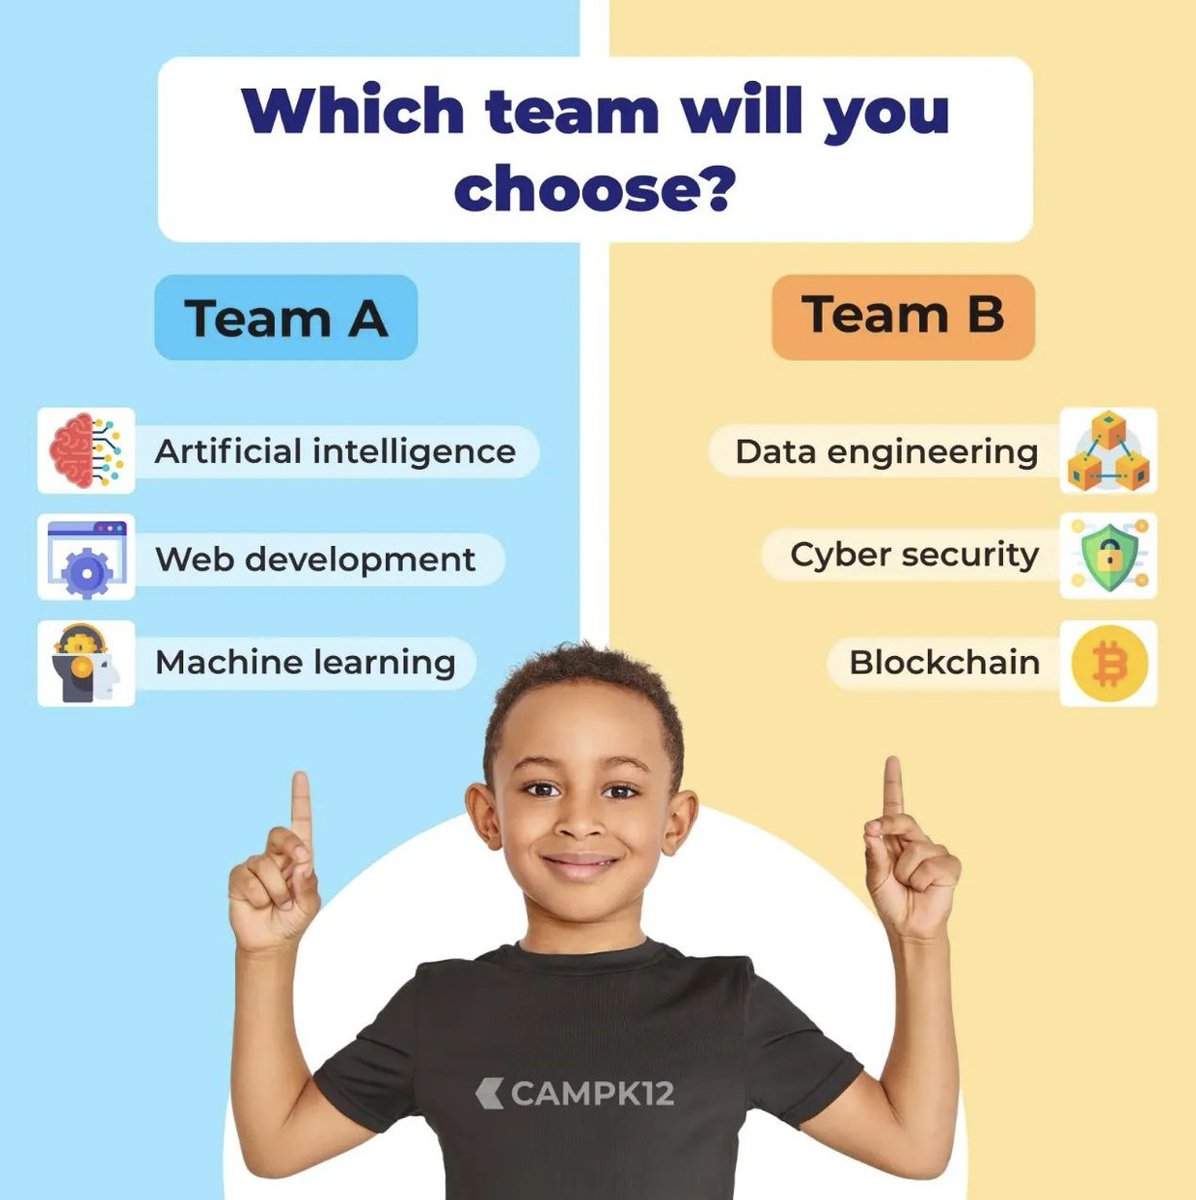 Artificial Intelligence, App Development, Crypto, Blockchain and so much more! Camp K12 is a paradise for all data science lovers, indeed. Which skills would you love to master? Tell us which team are you on!? #ArtificialIntelligence #appdevelopment #coding #Crypto #DataScience